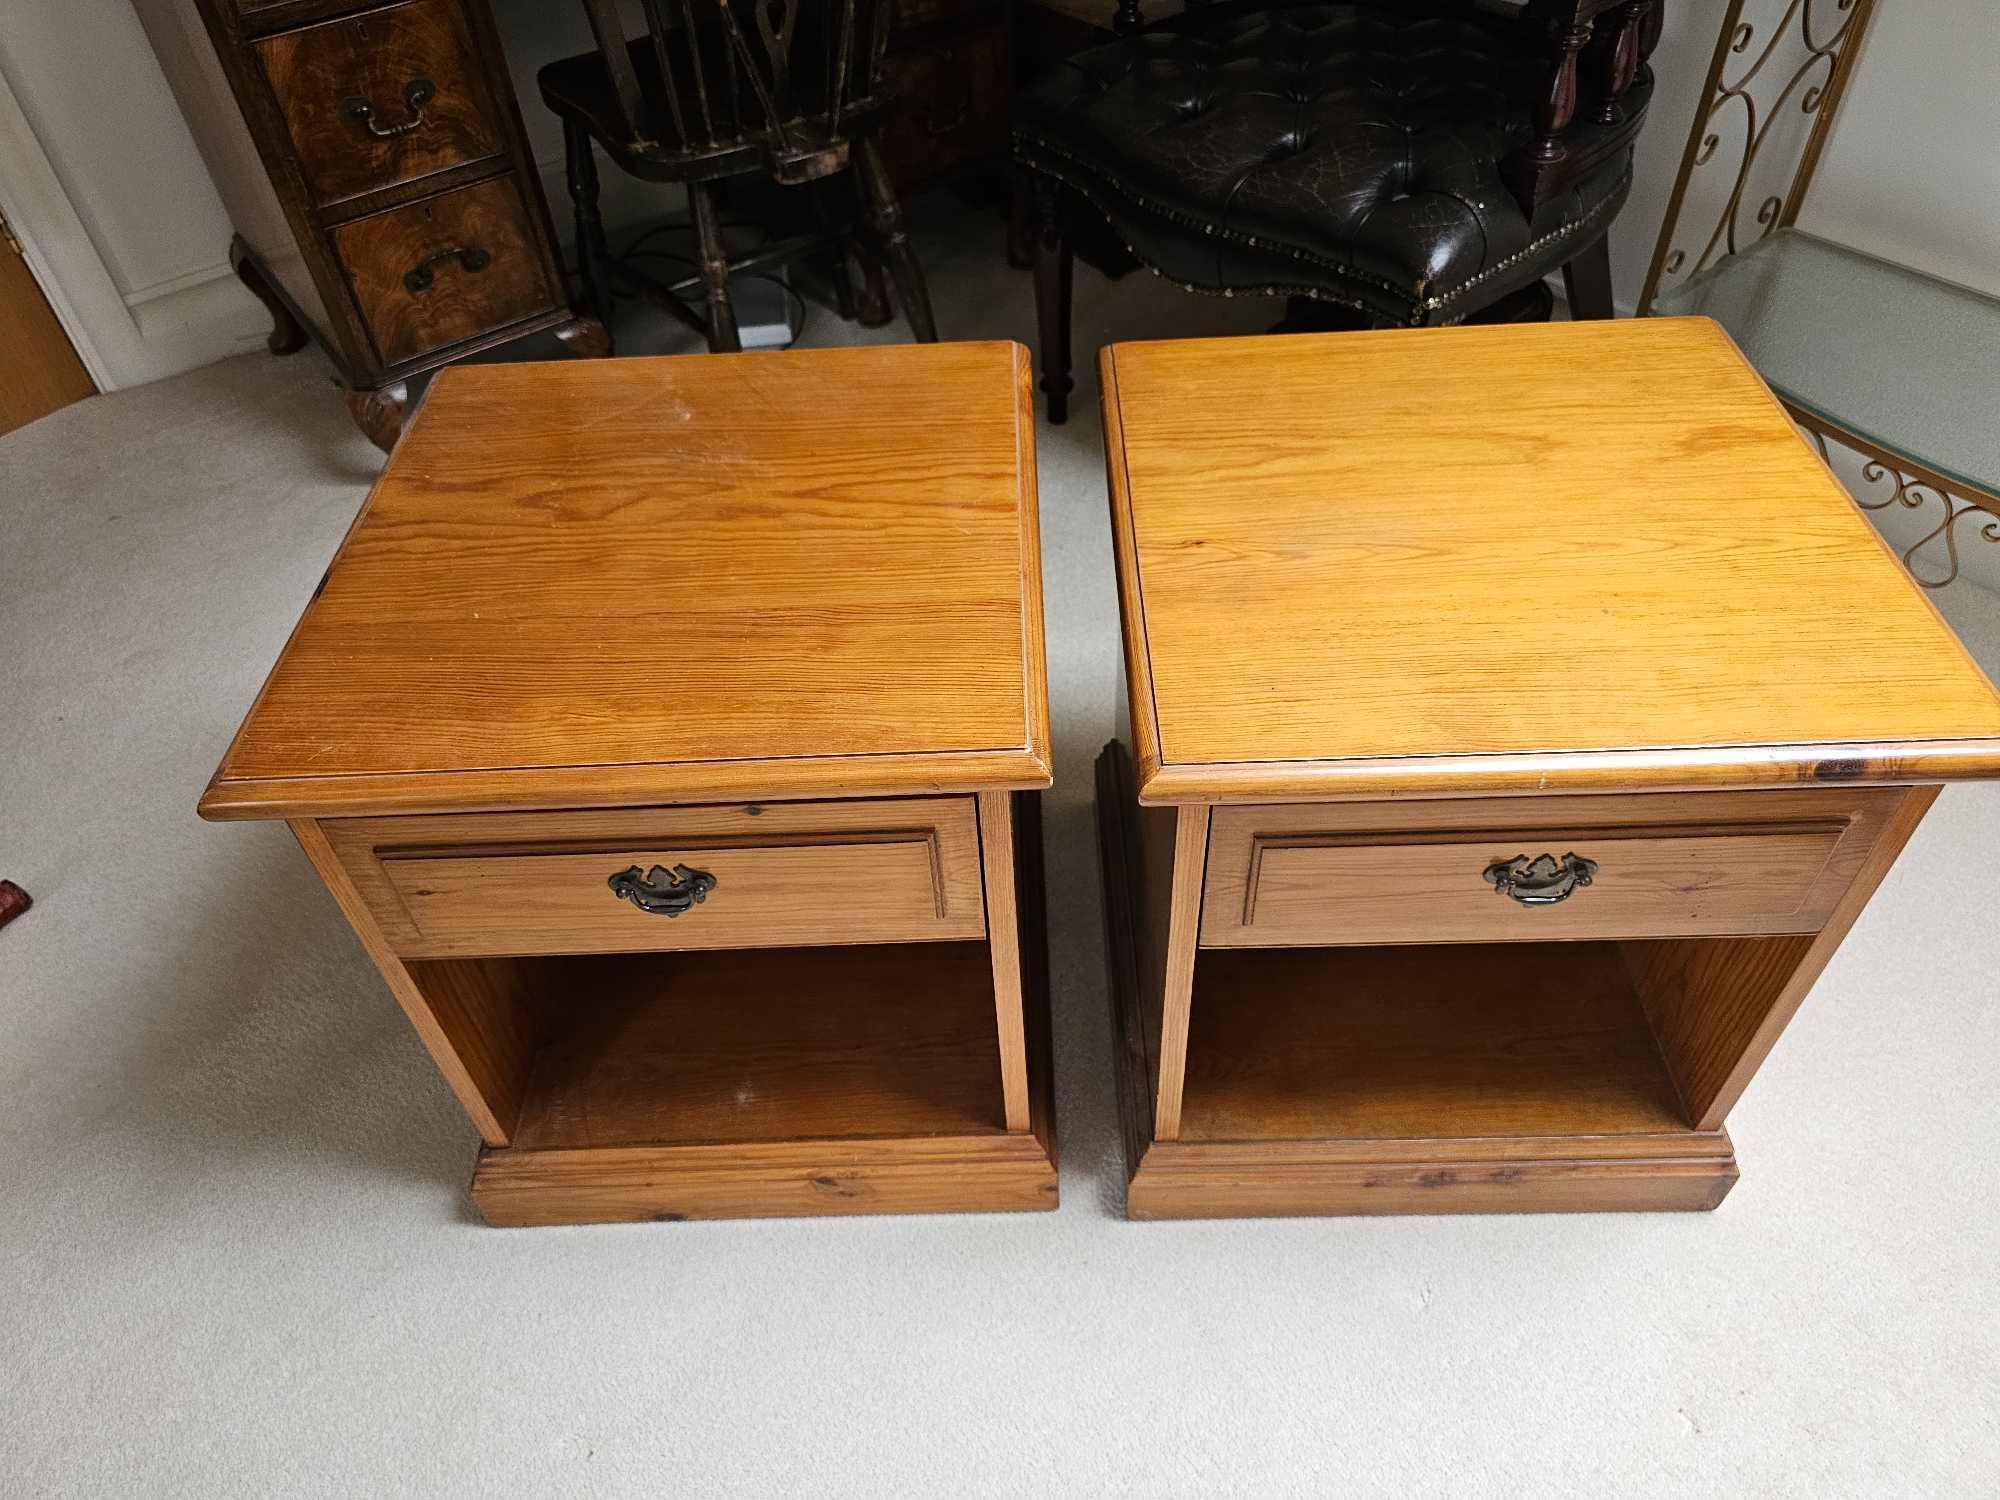 A Pair Of Younger Furniture Single Drawer Bedside Chests In Cherrywood 48 X 47 X 53cm A Younger - Image 3 of 6